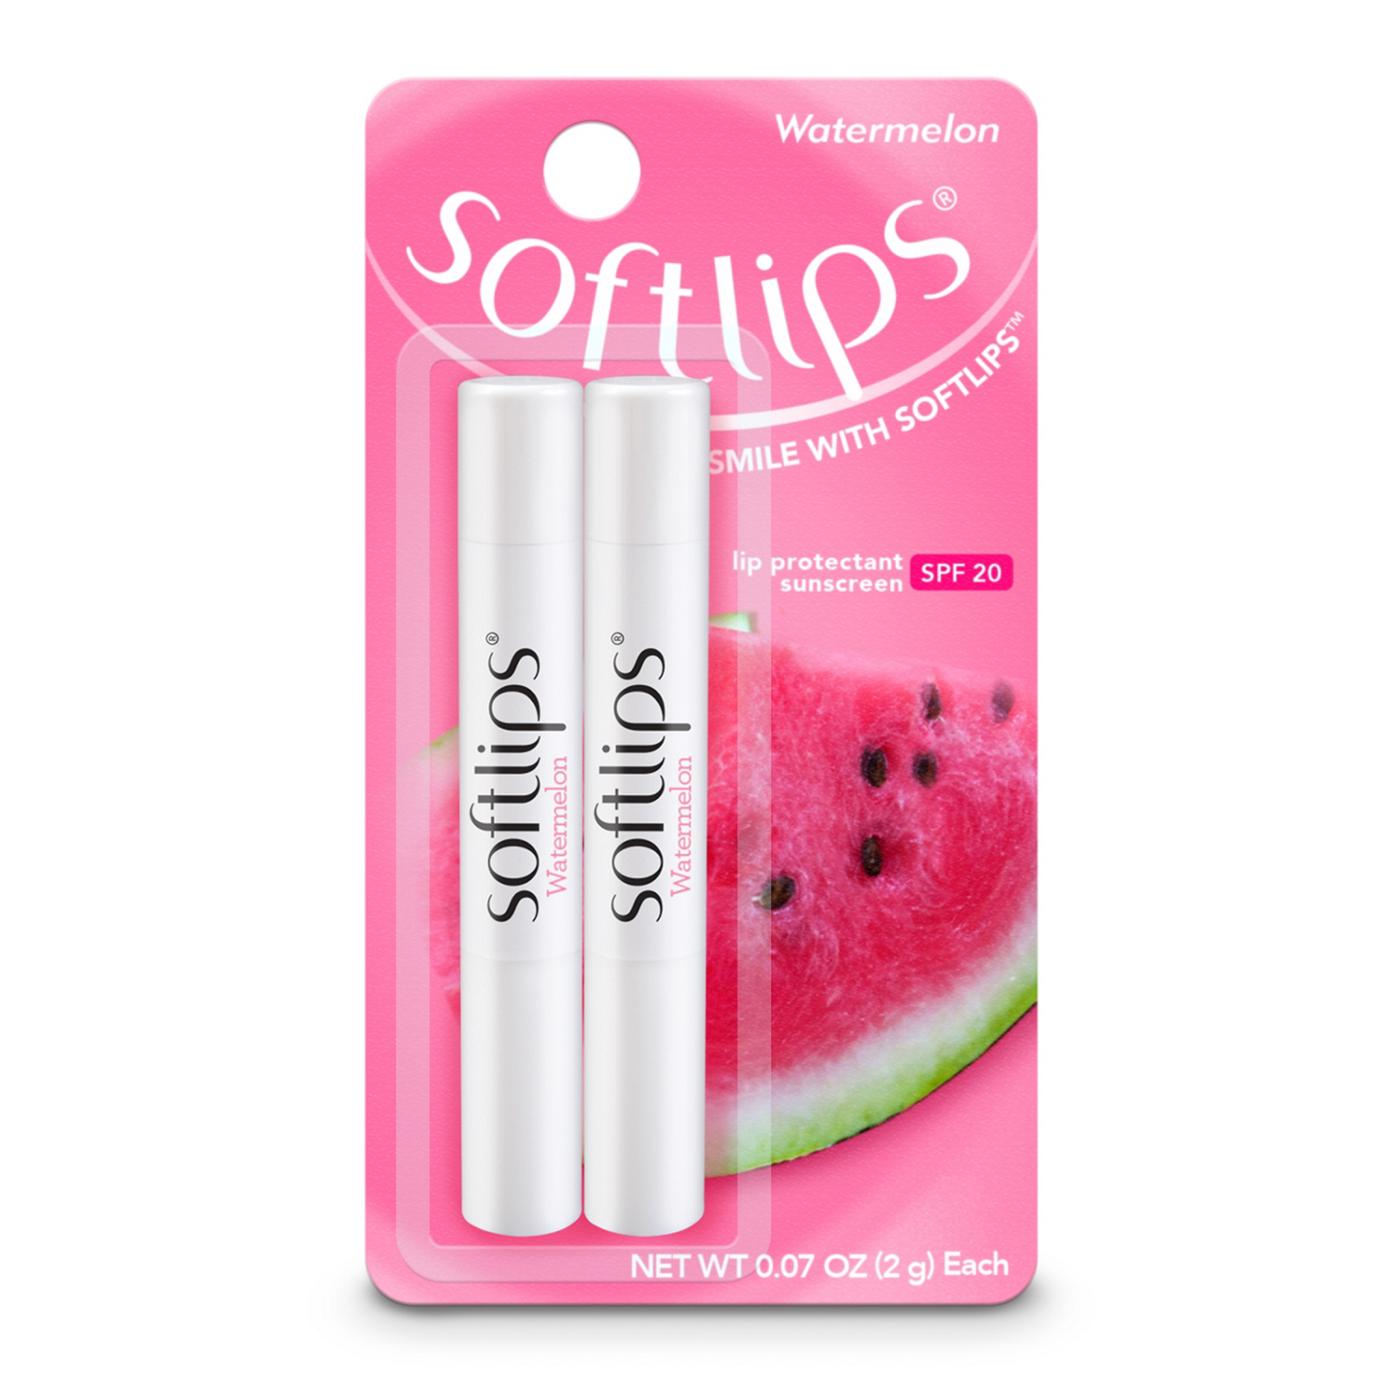 Softlips Watermelon SPF 20 Lip Protectant; image 1 of 8